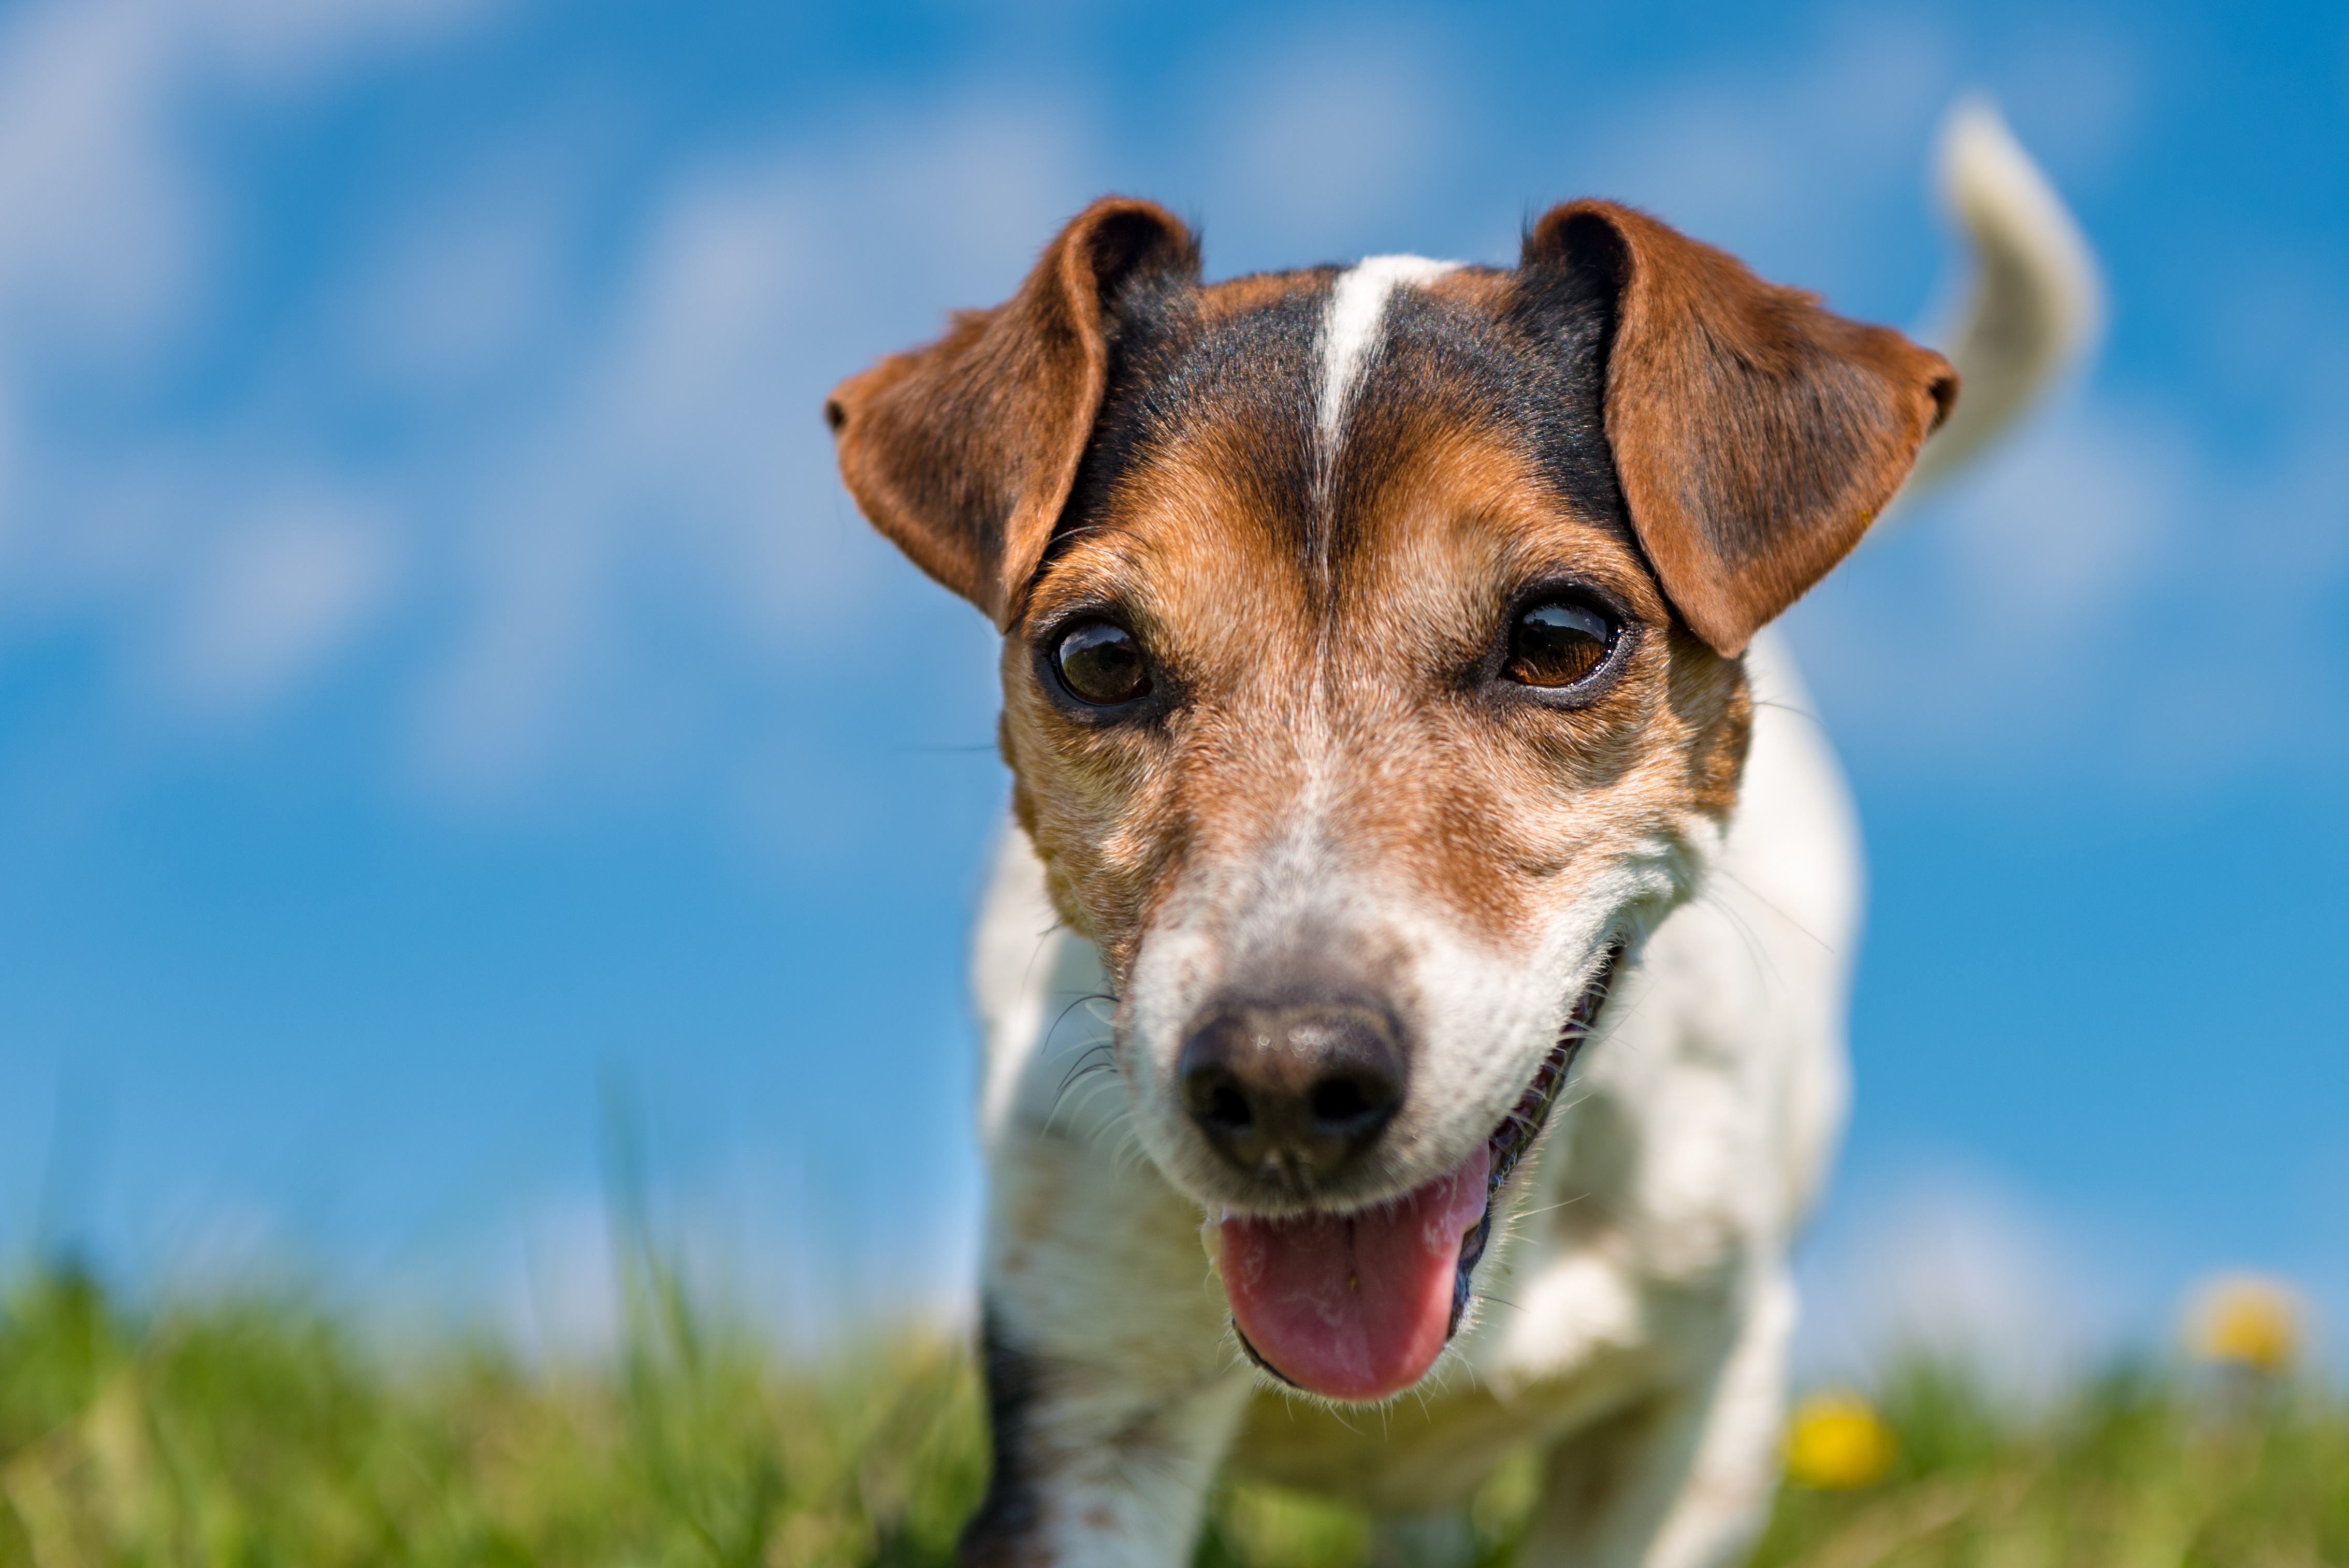 Dog Jack Russell Terrier Pet 4536x3028